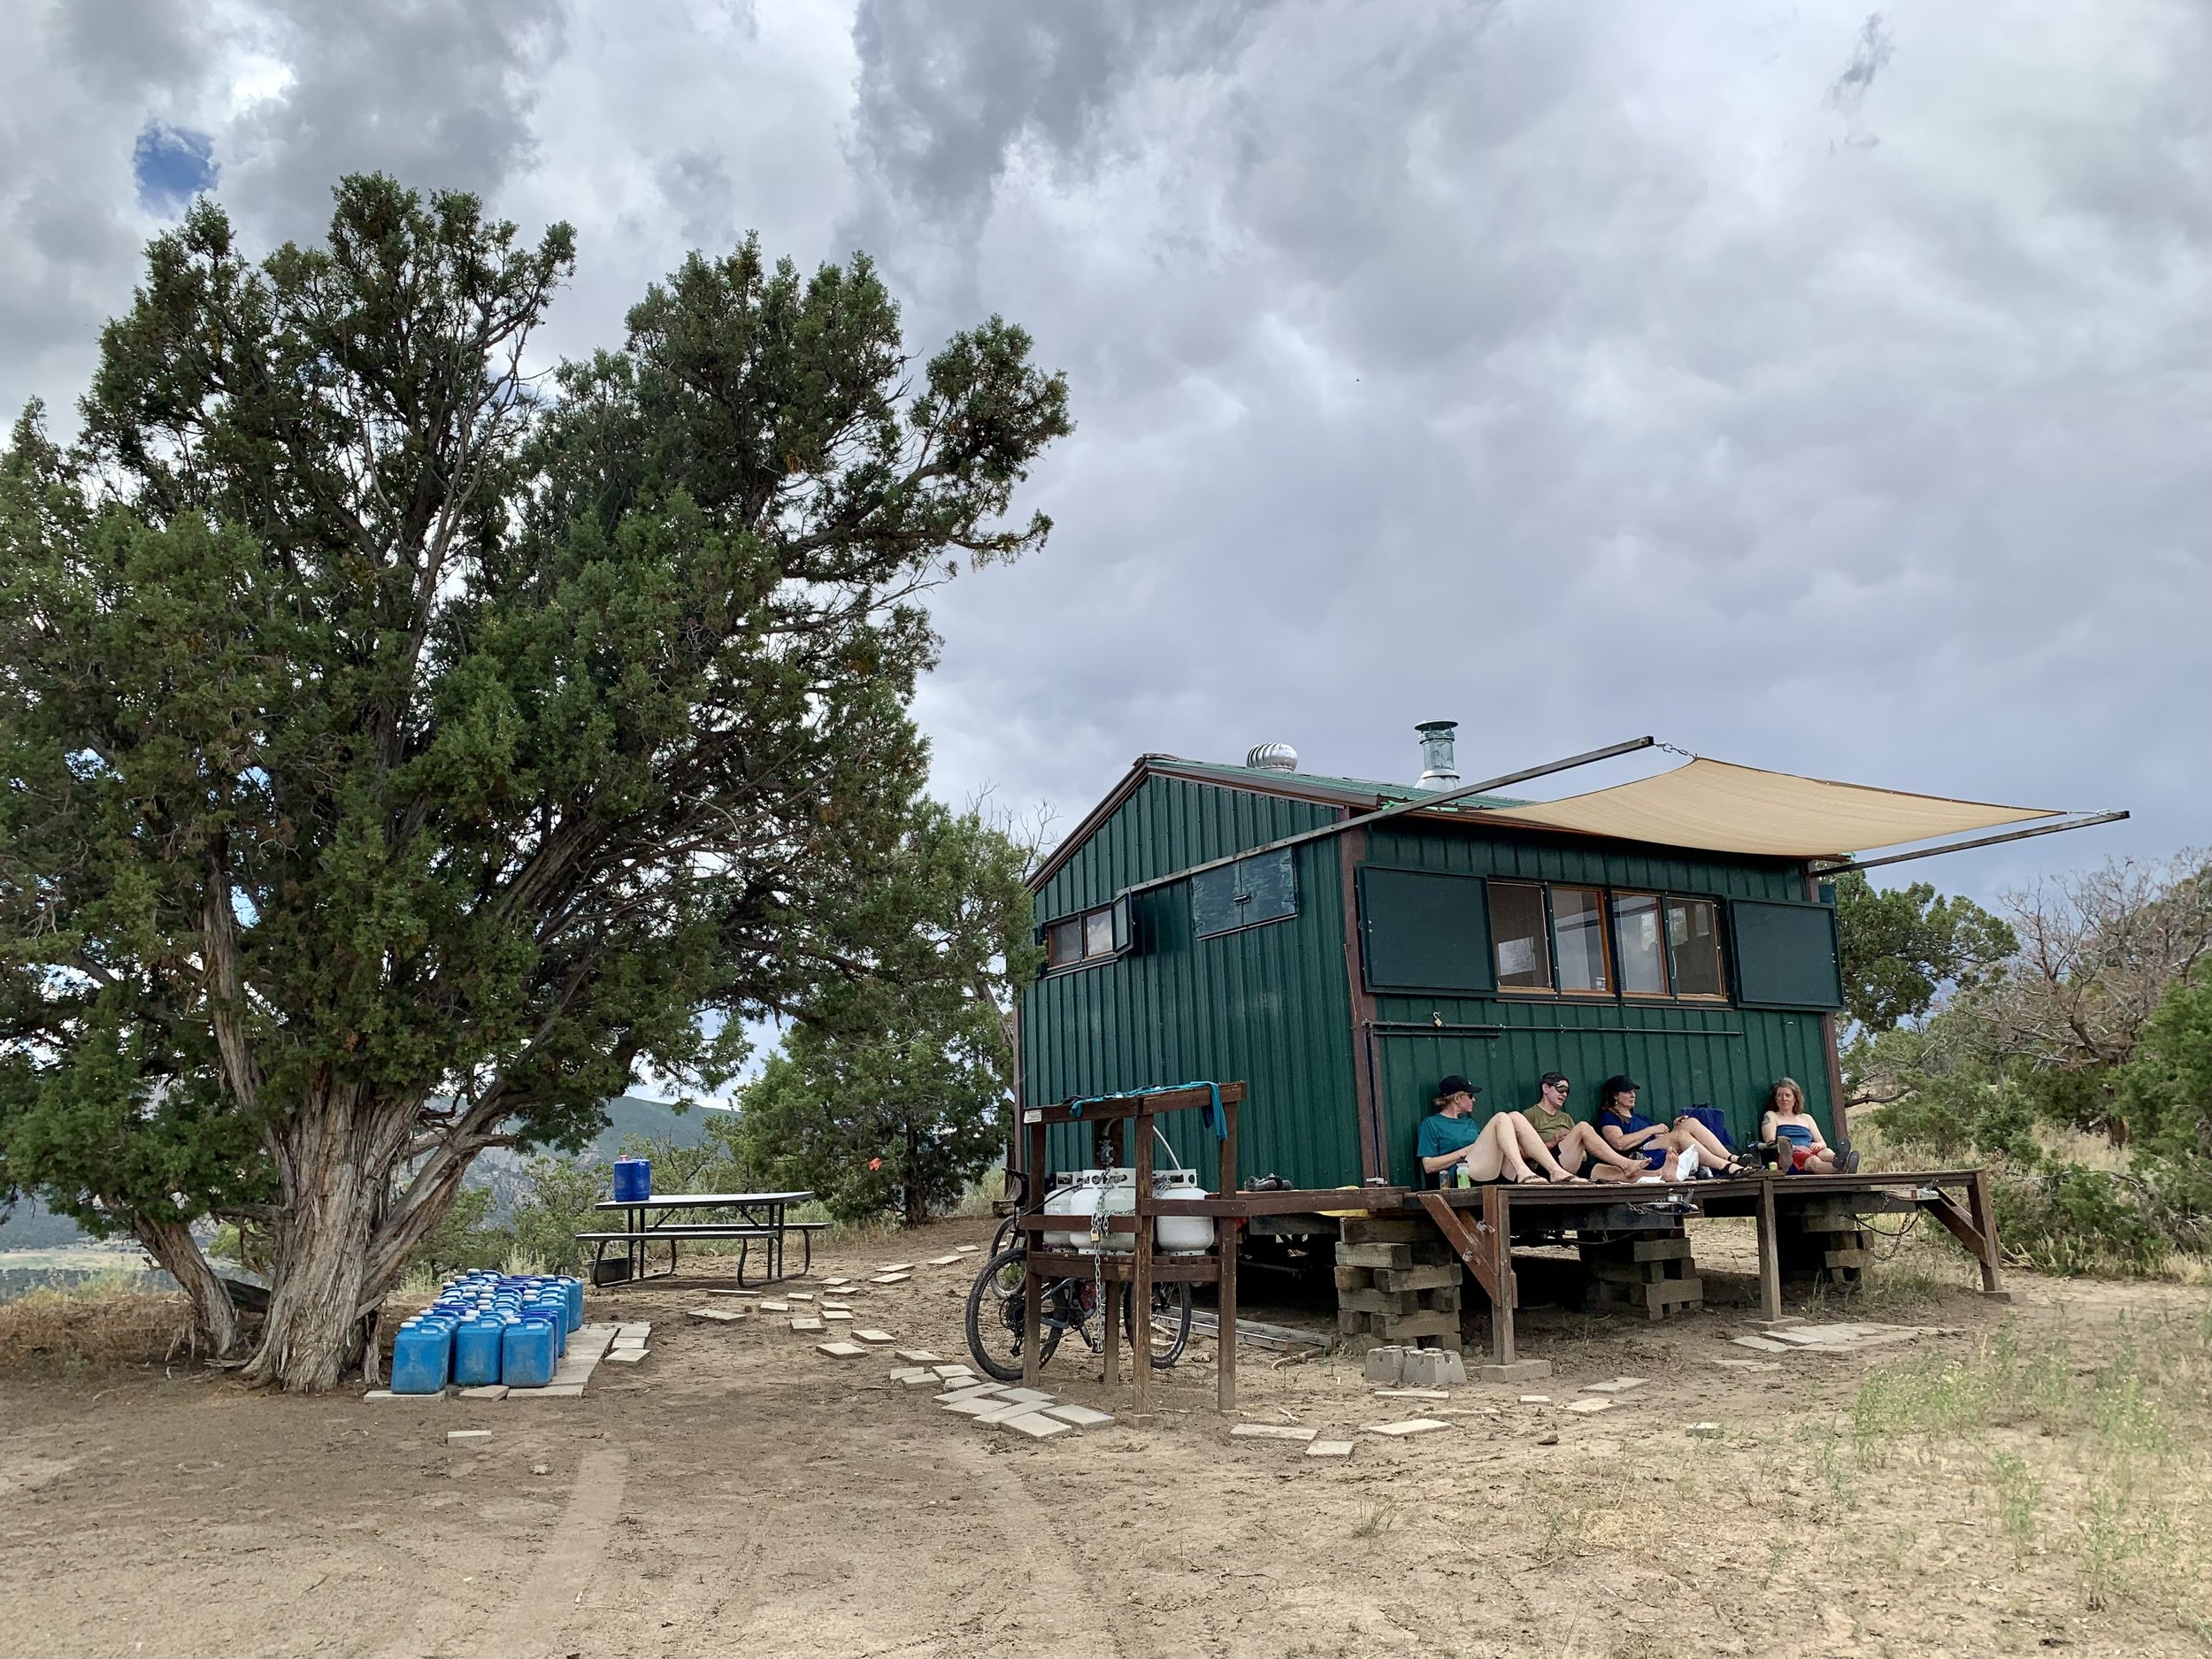 Hanging at the Dry Creek hut